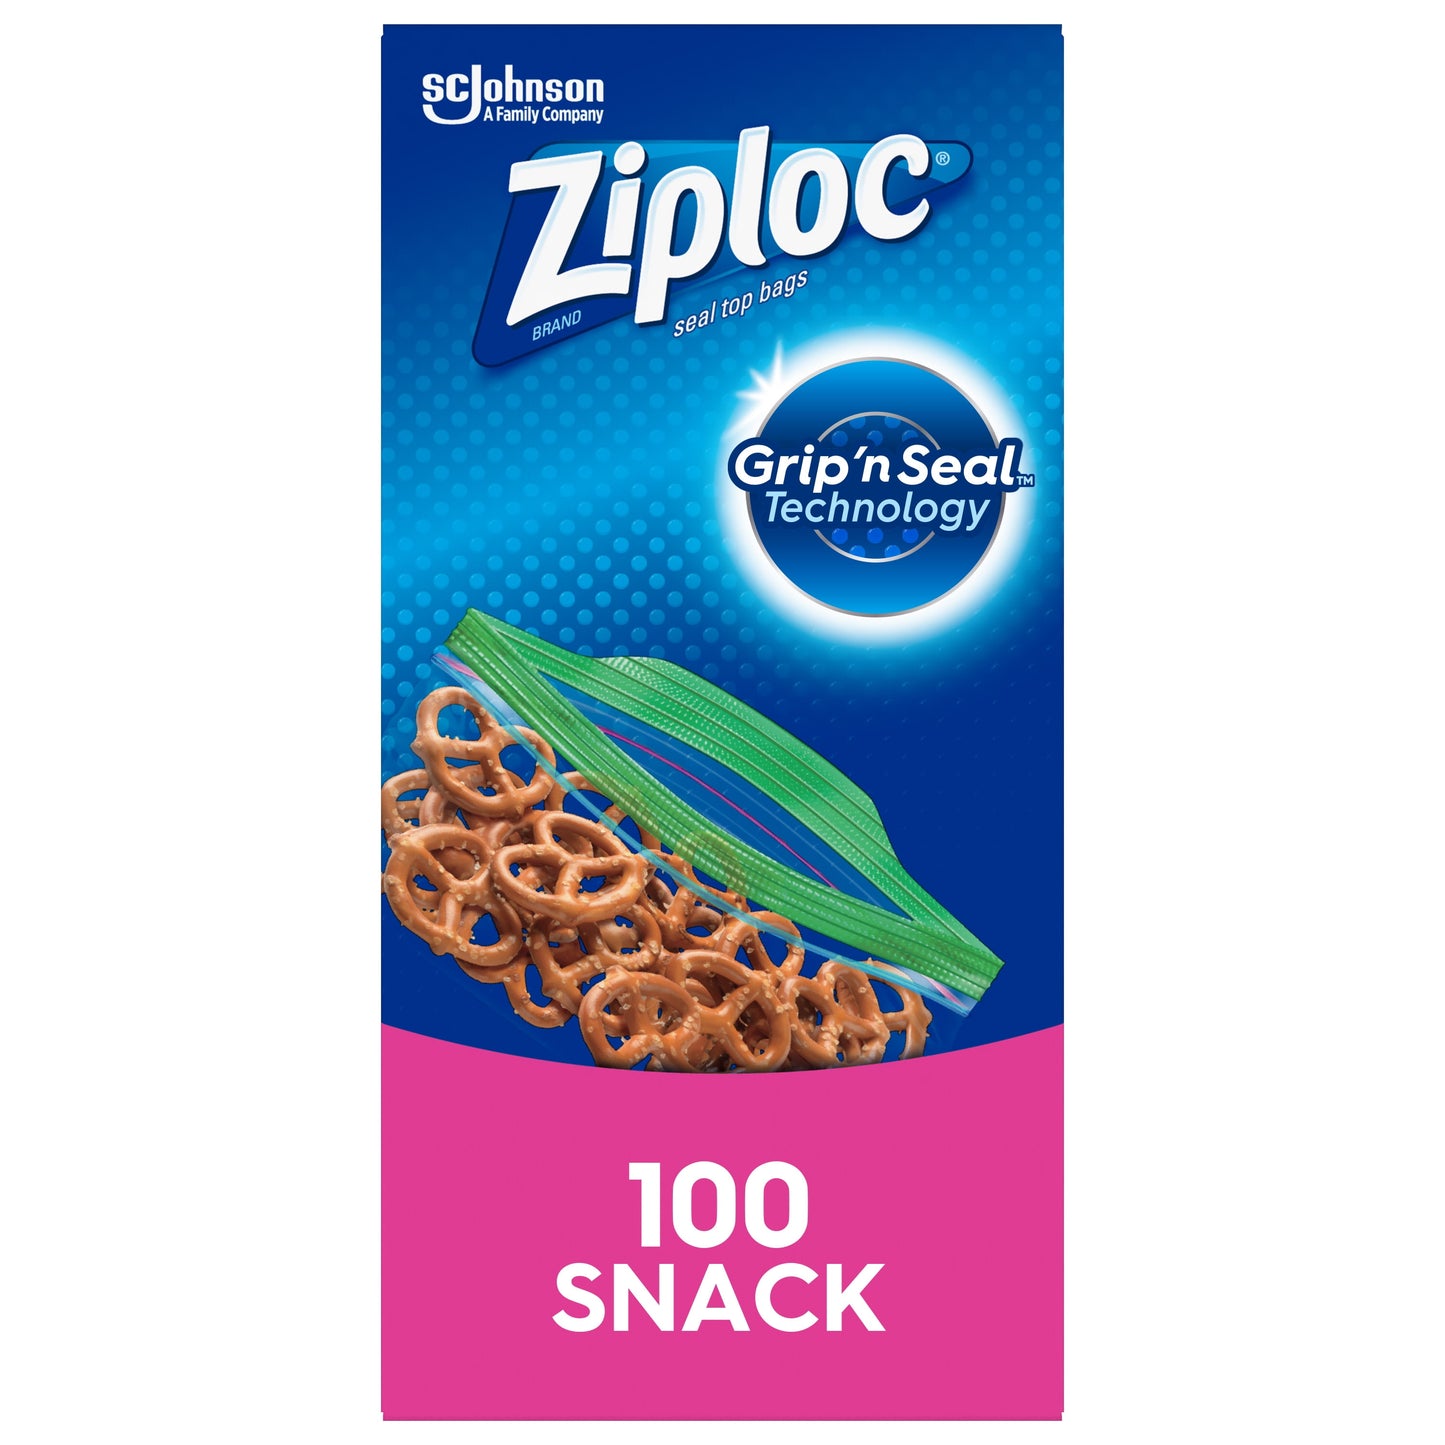 Ziploc® Brand Snack Bags with Grip 'n Seal Technology, 100 Count